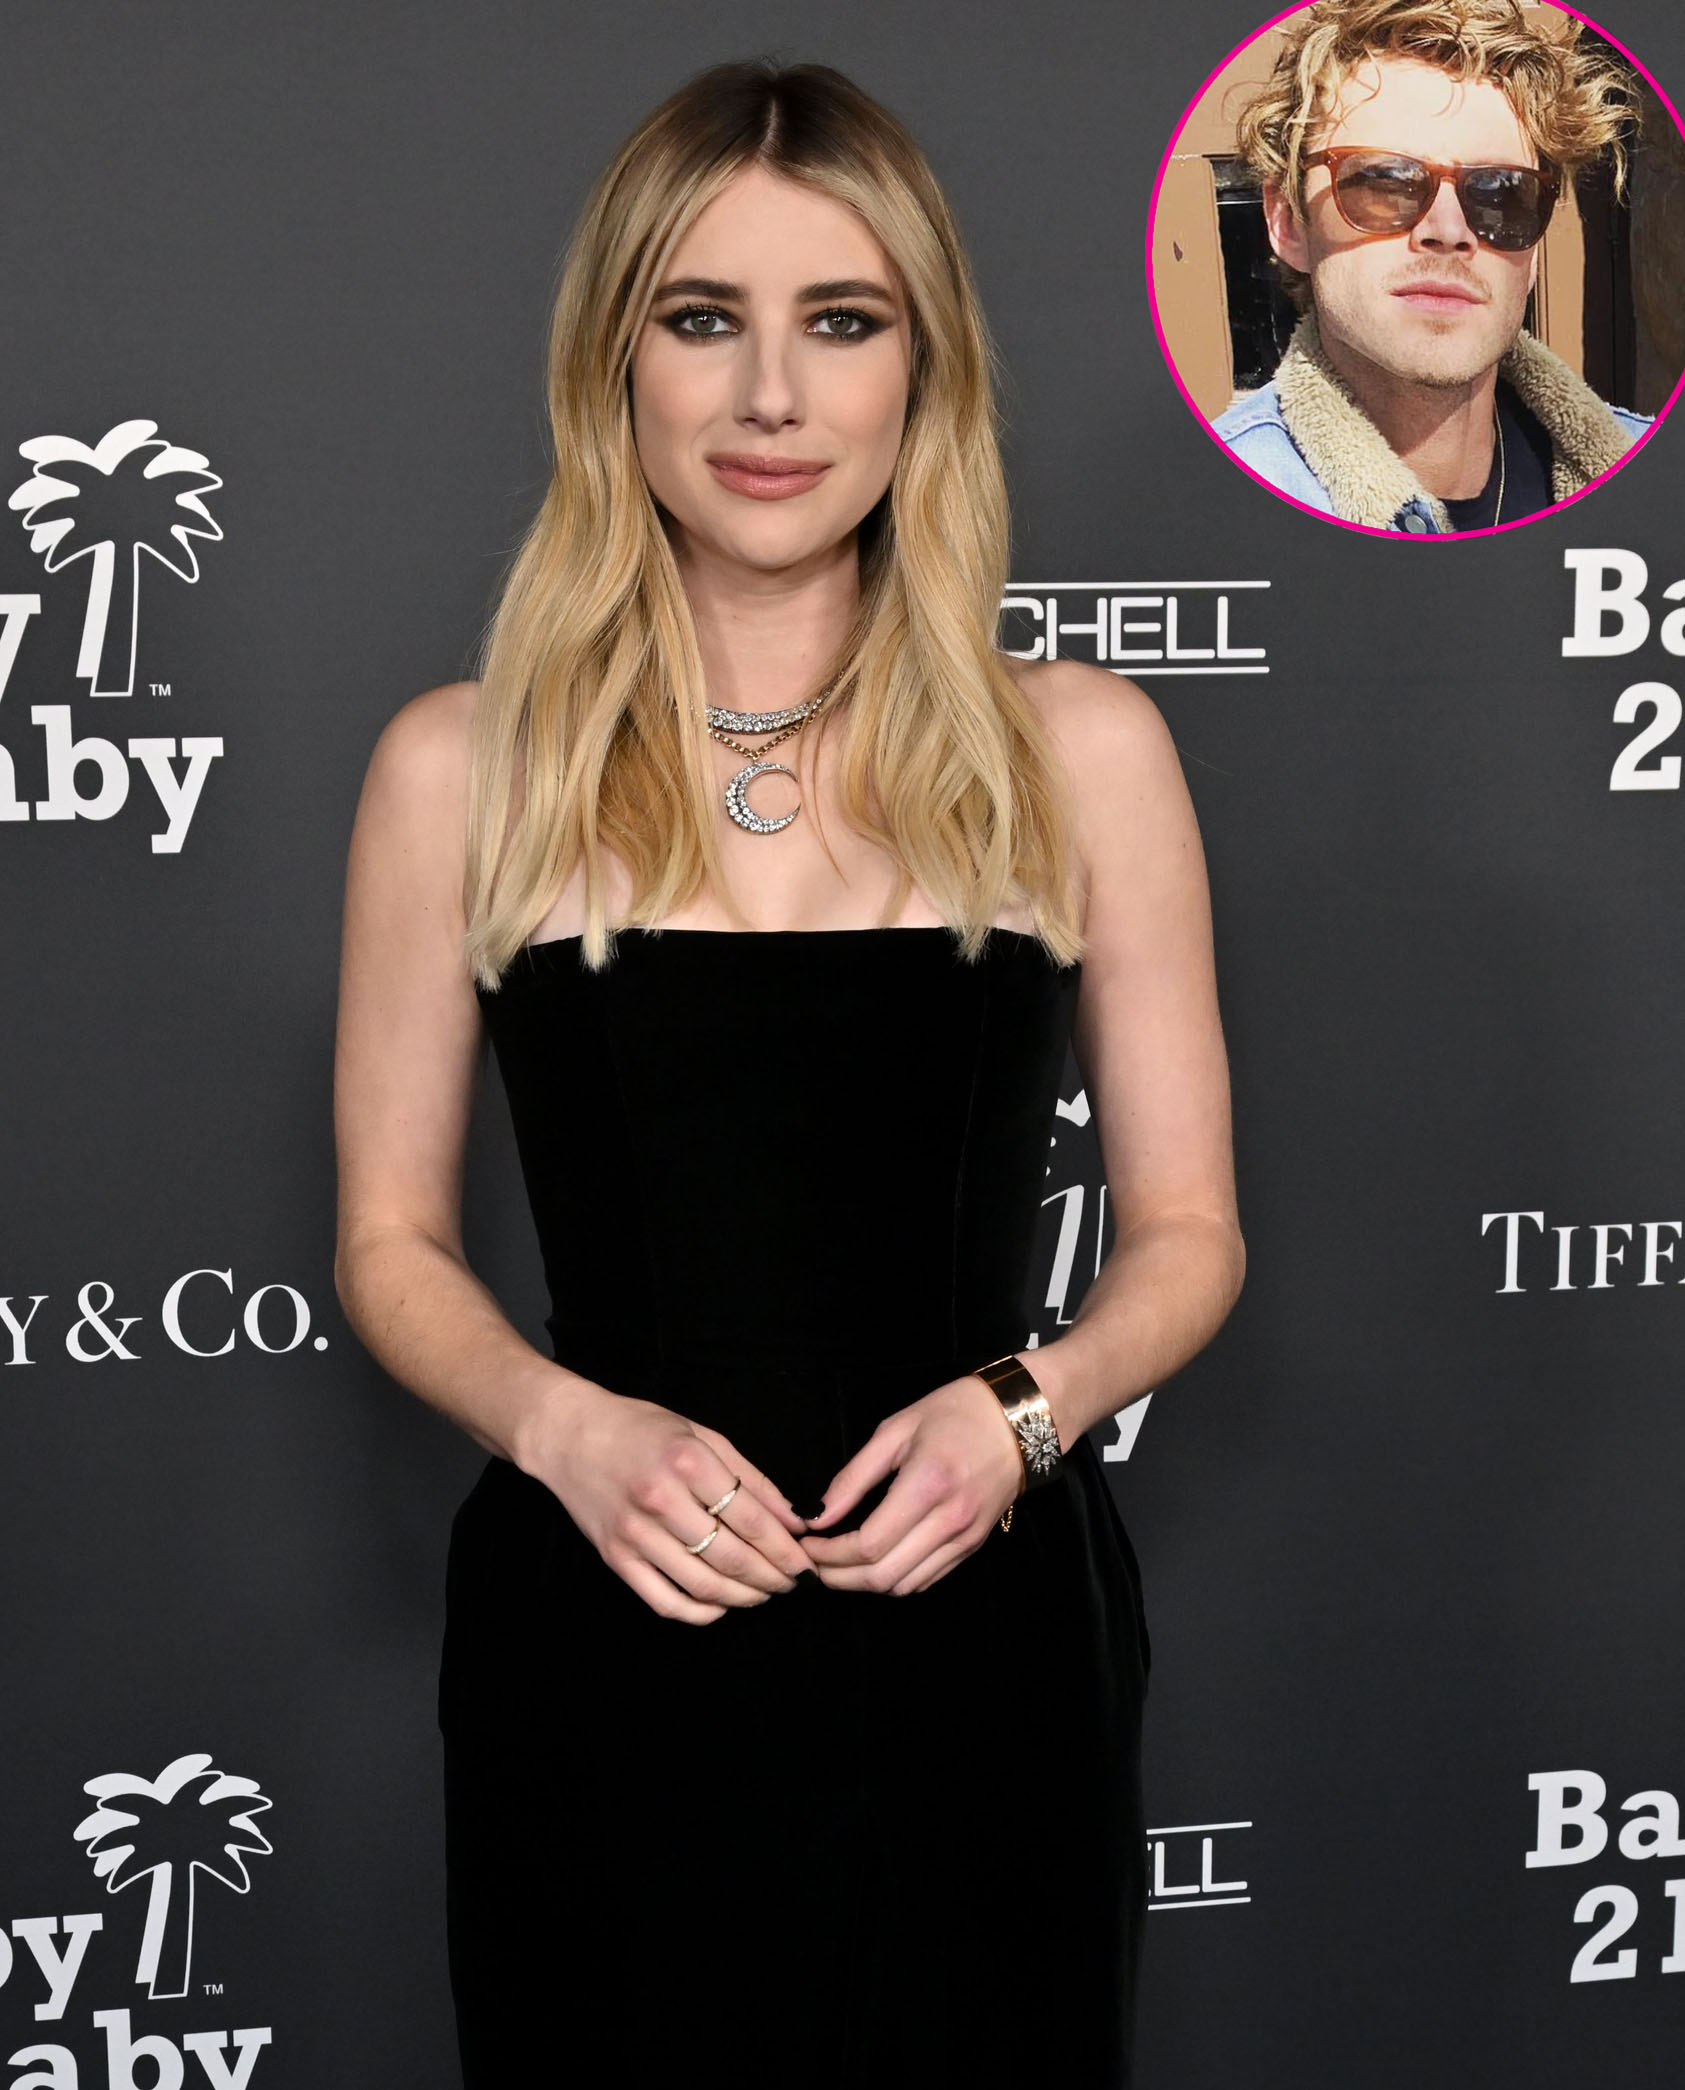 Emma Roberts and Cody John: A Timeline of Their Relationship